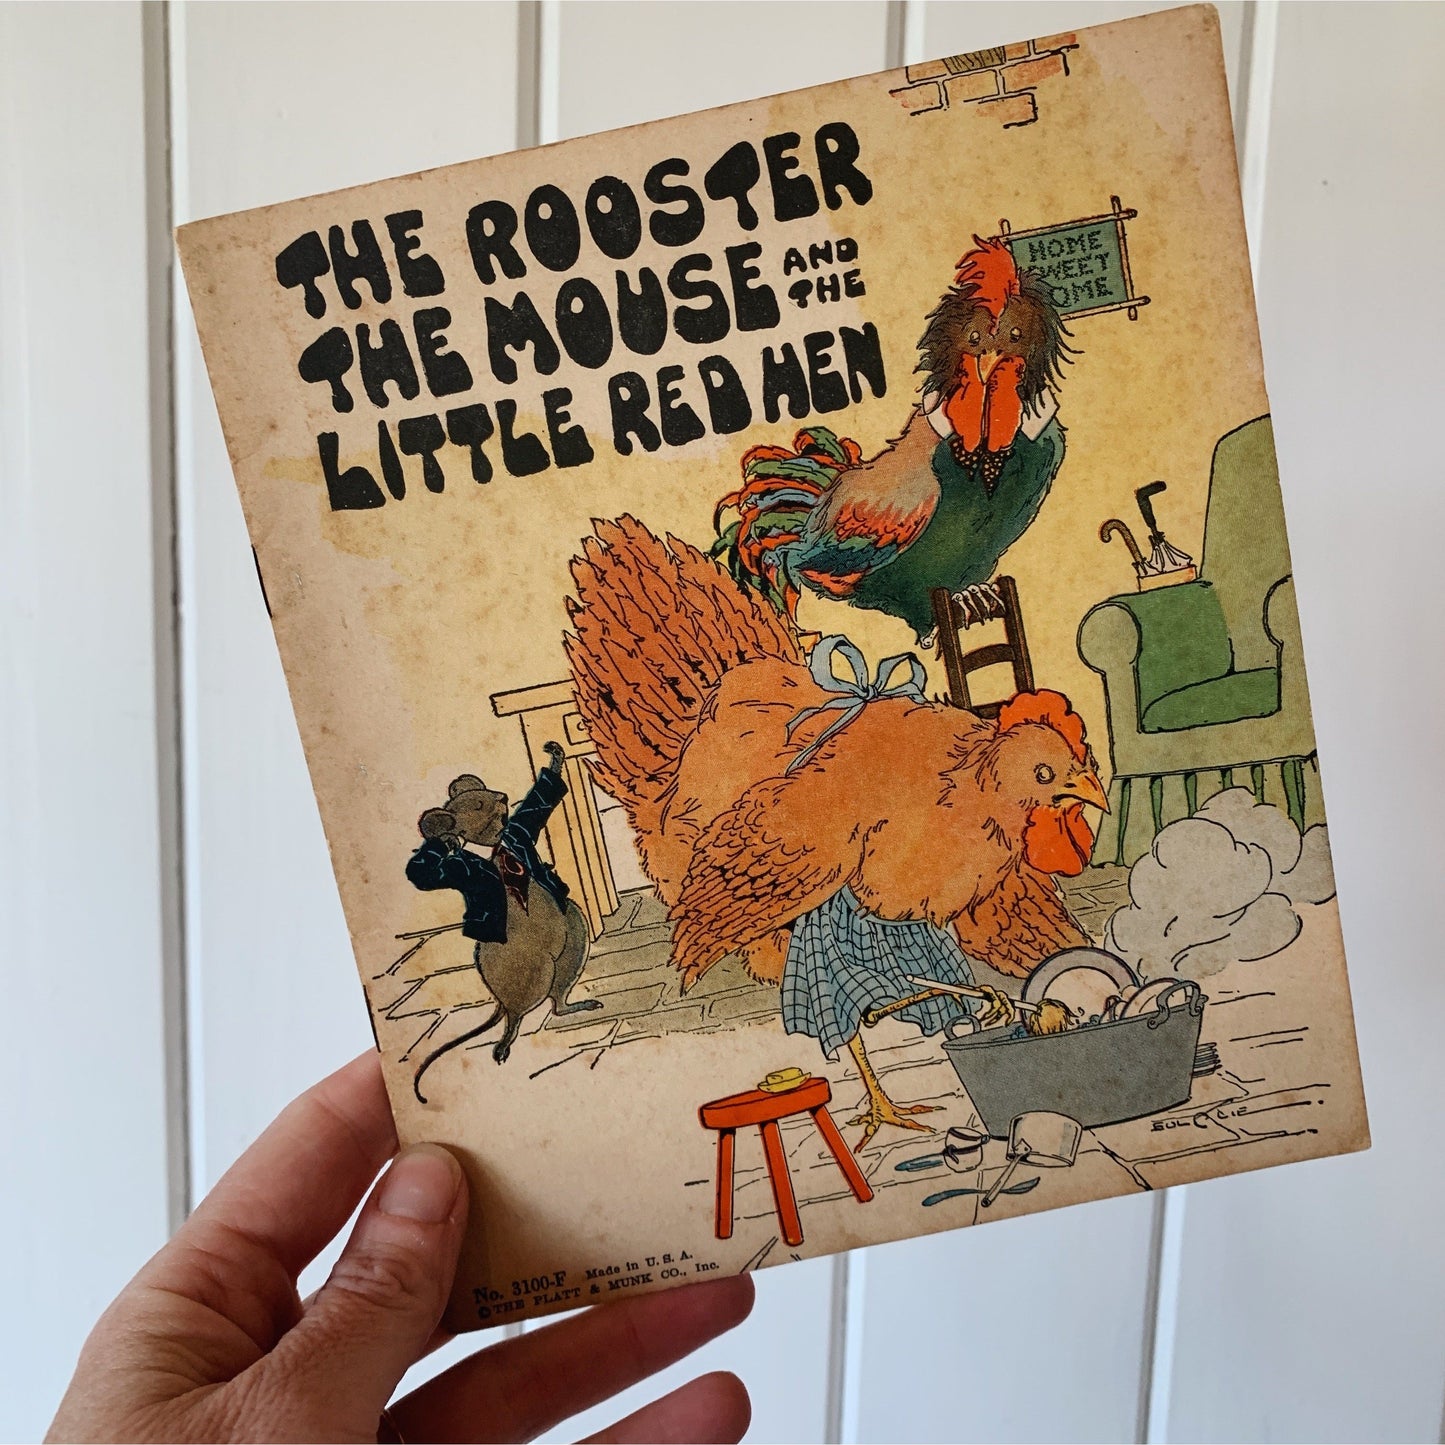 The Rooster, The Mouse, and the Little Red Hen, Platt & Munk Paperback, 1932